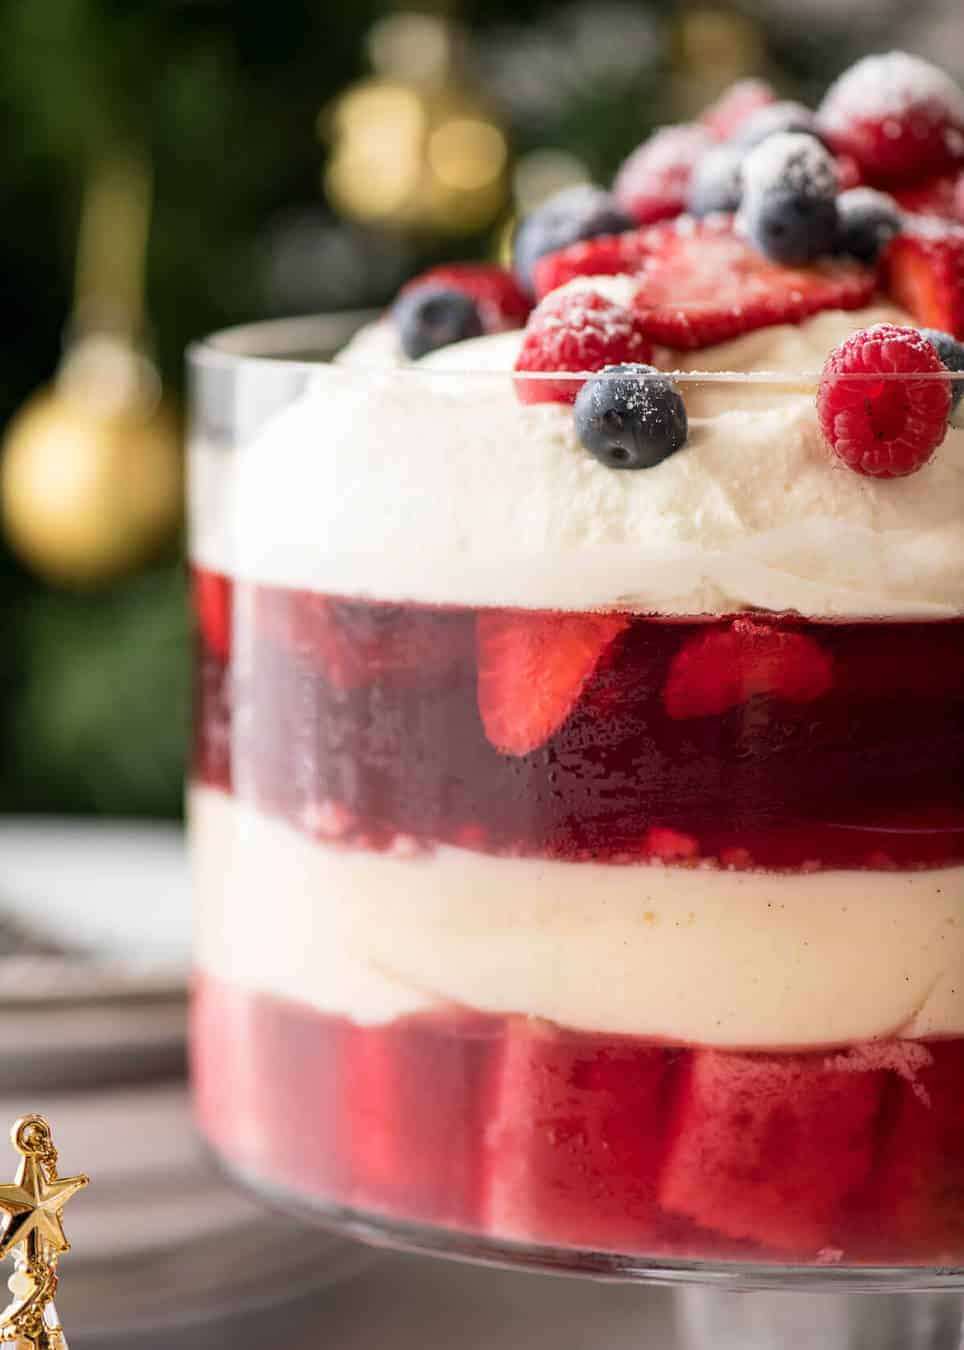 Layers of Cranberry Jelly and custard, and piled high with whipped cream and fruit, this Christmas Trifle will brighten any table! recipetineats.com